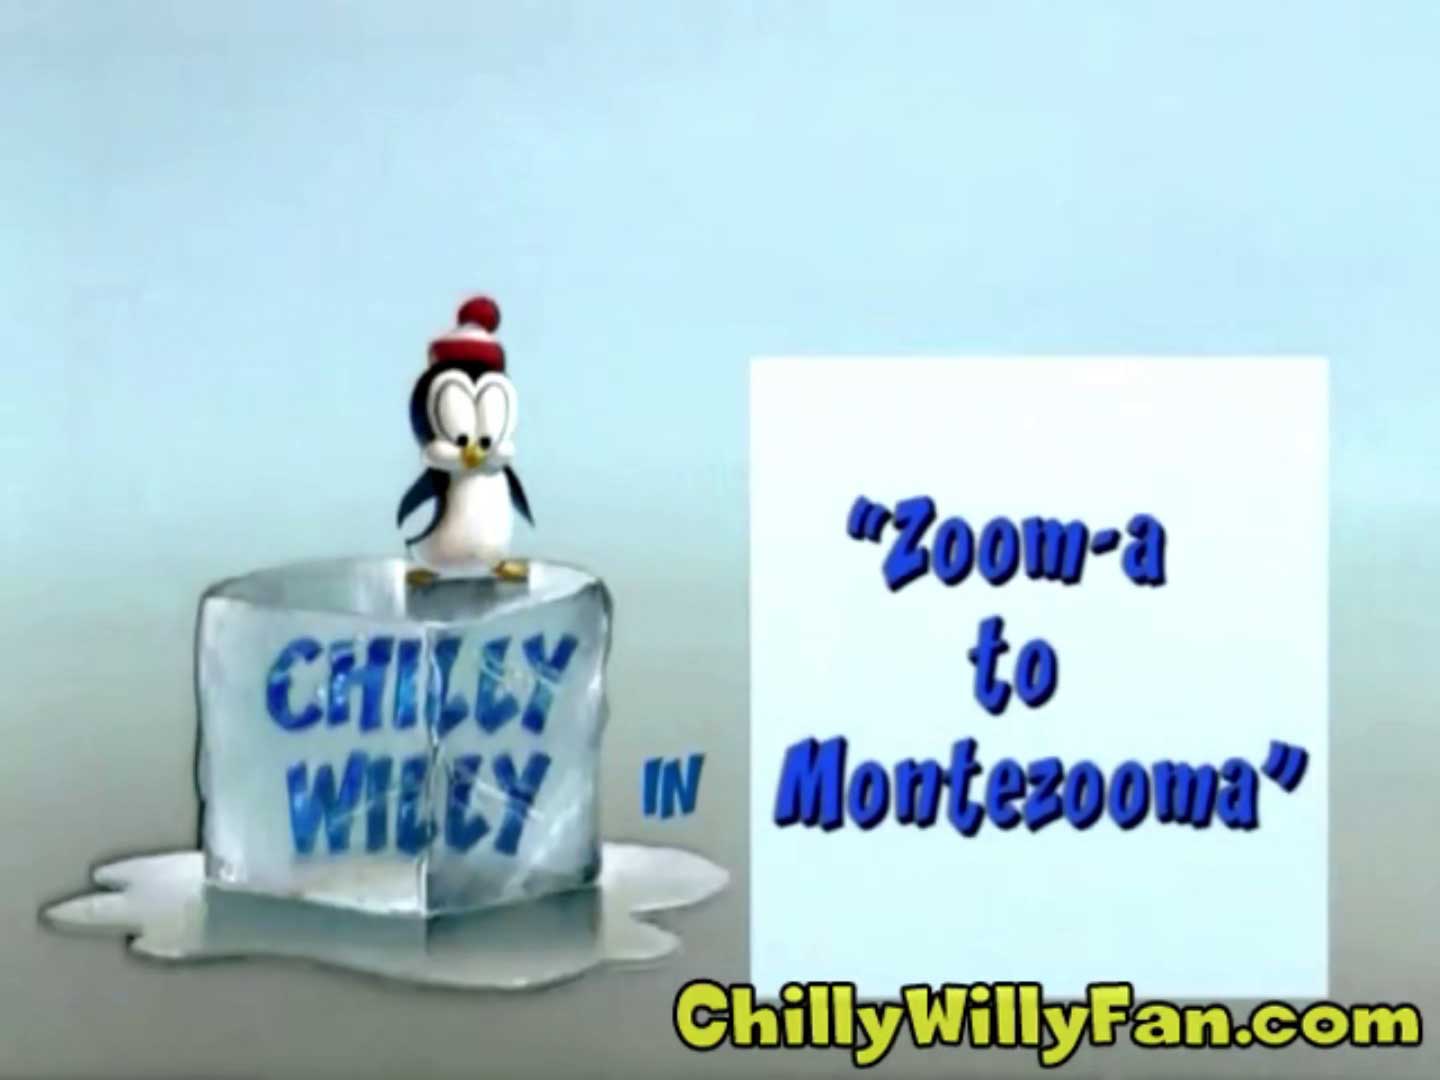 Chilly Willy - Zoom-a to Montezooma